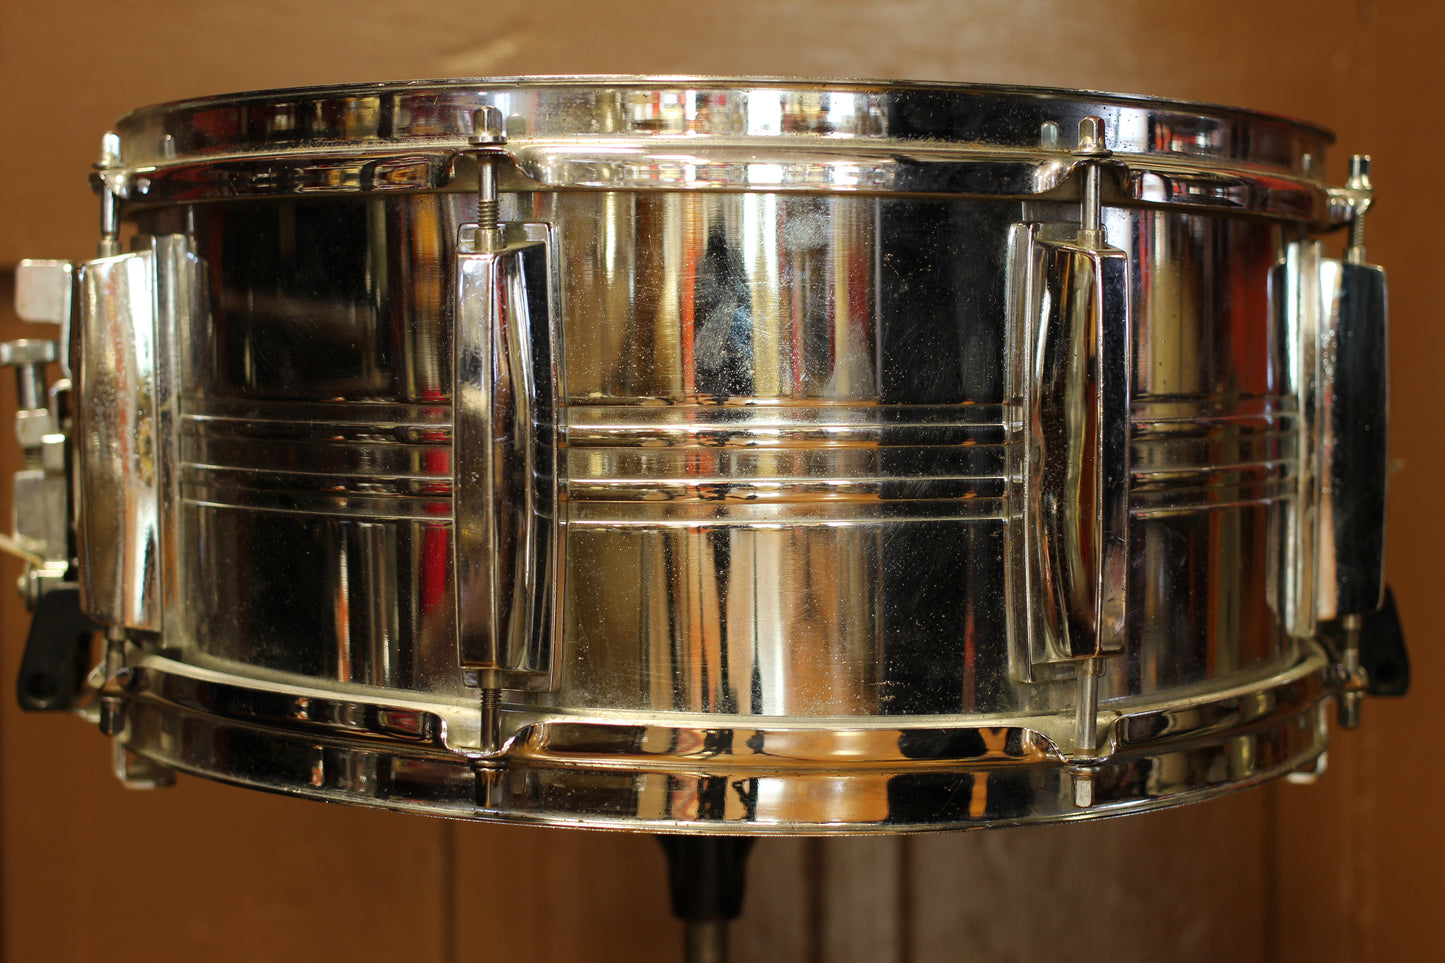 1980's Yamaha 'SD765MA' Snare Drum 6.5"x14"